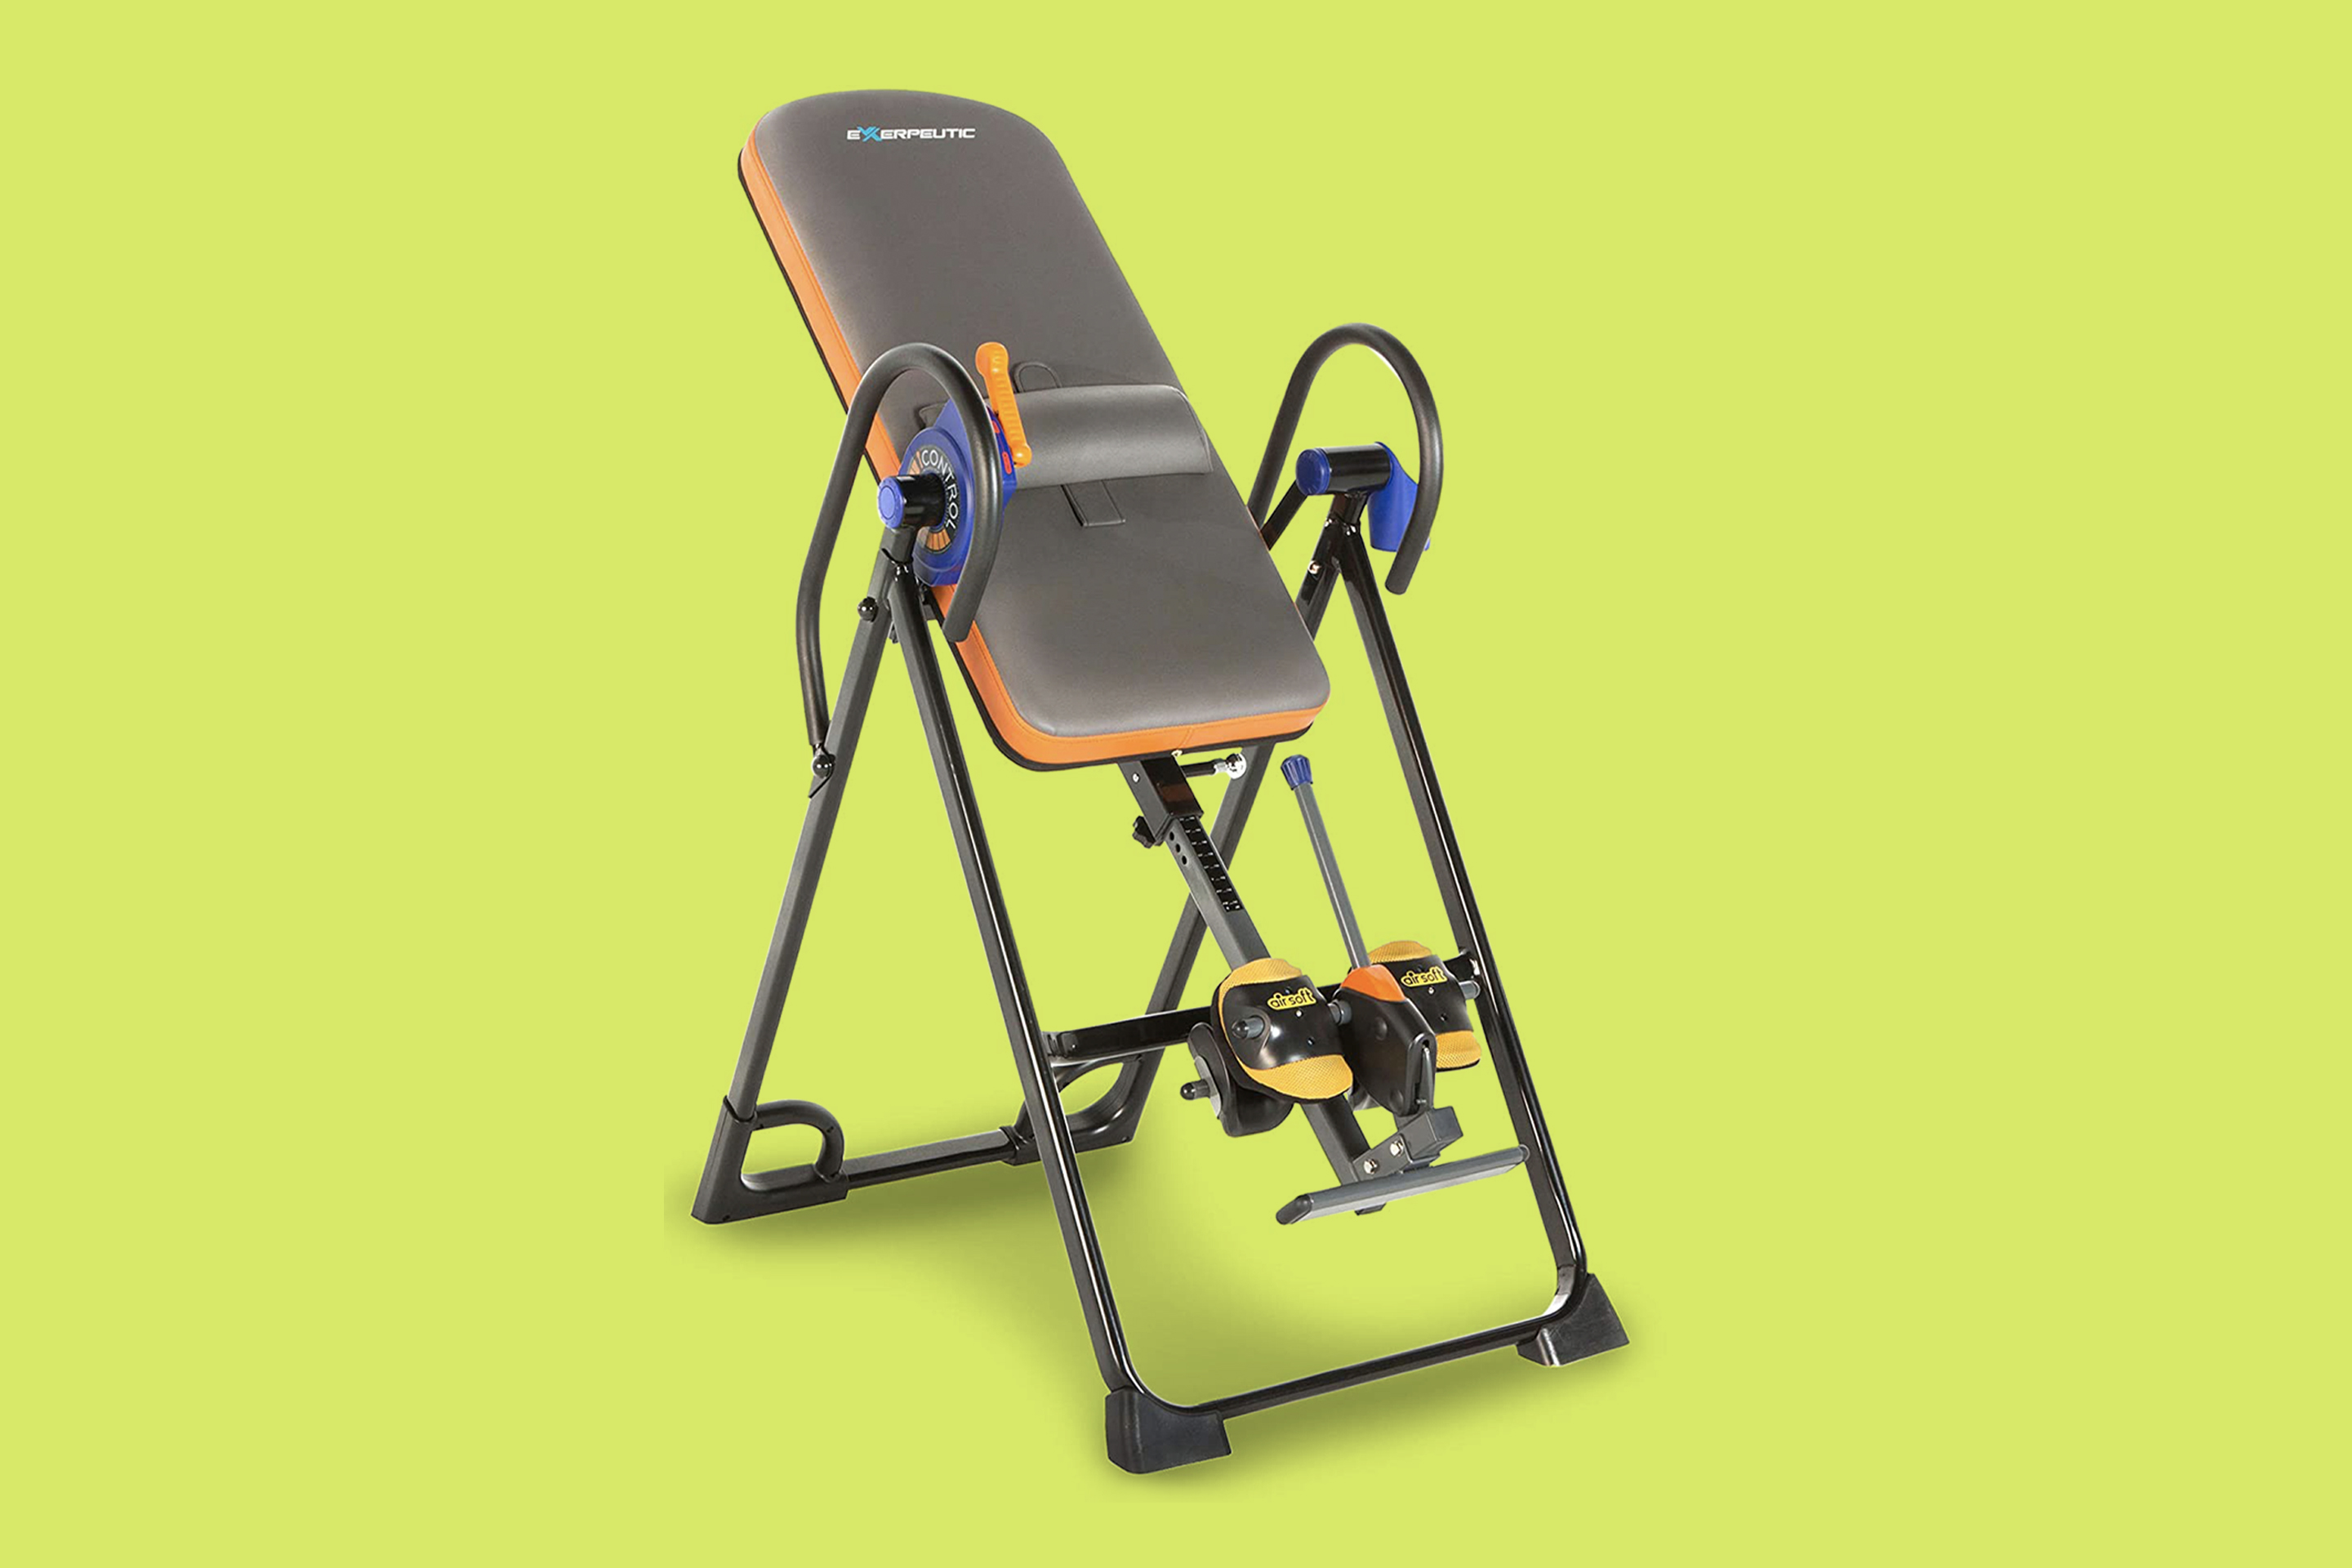 The Best Inversion Tables for Your Money